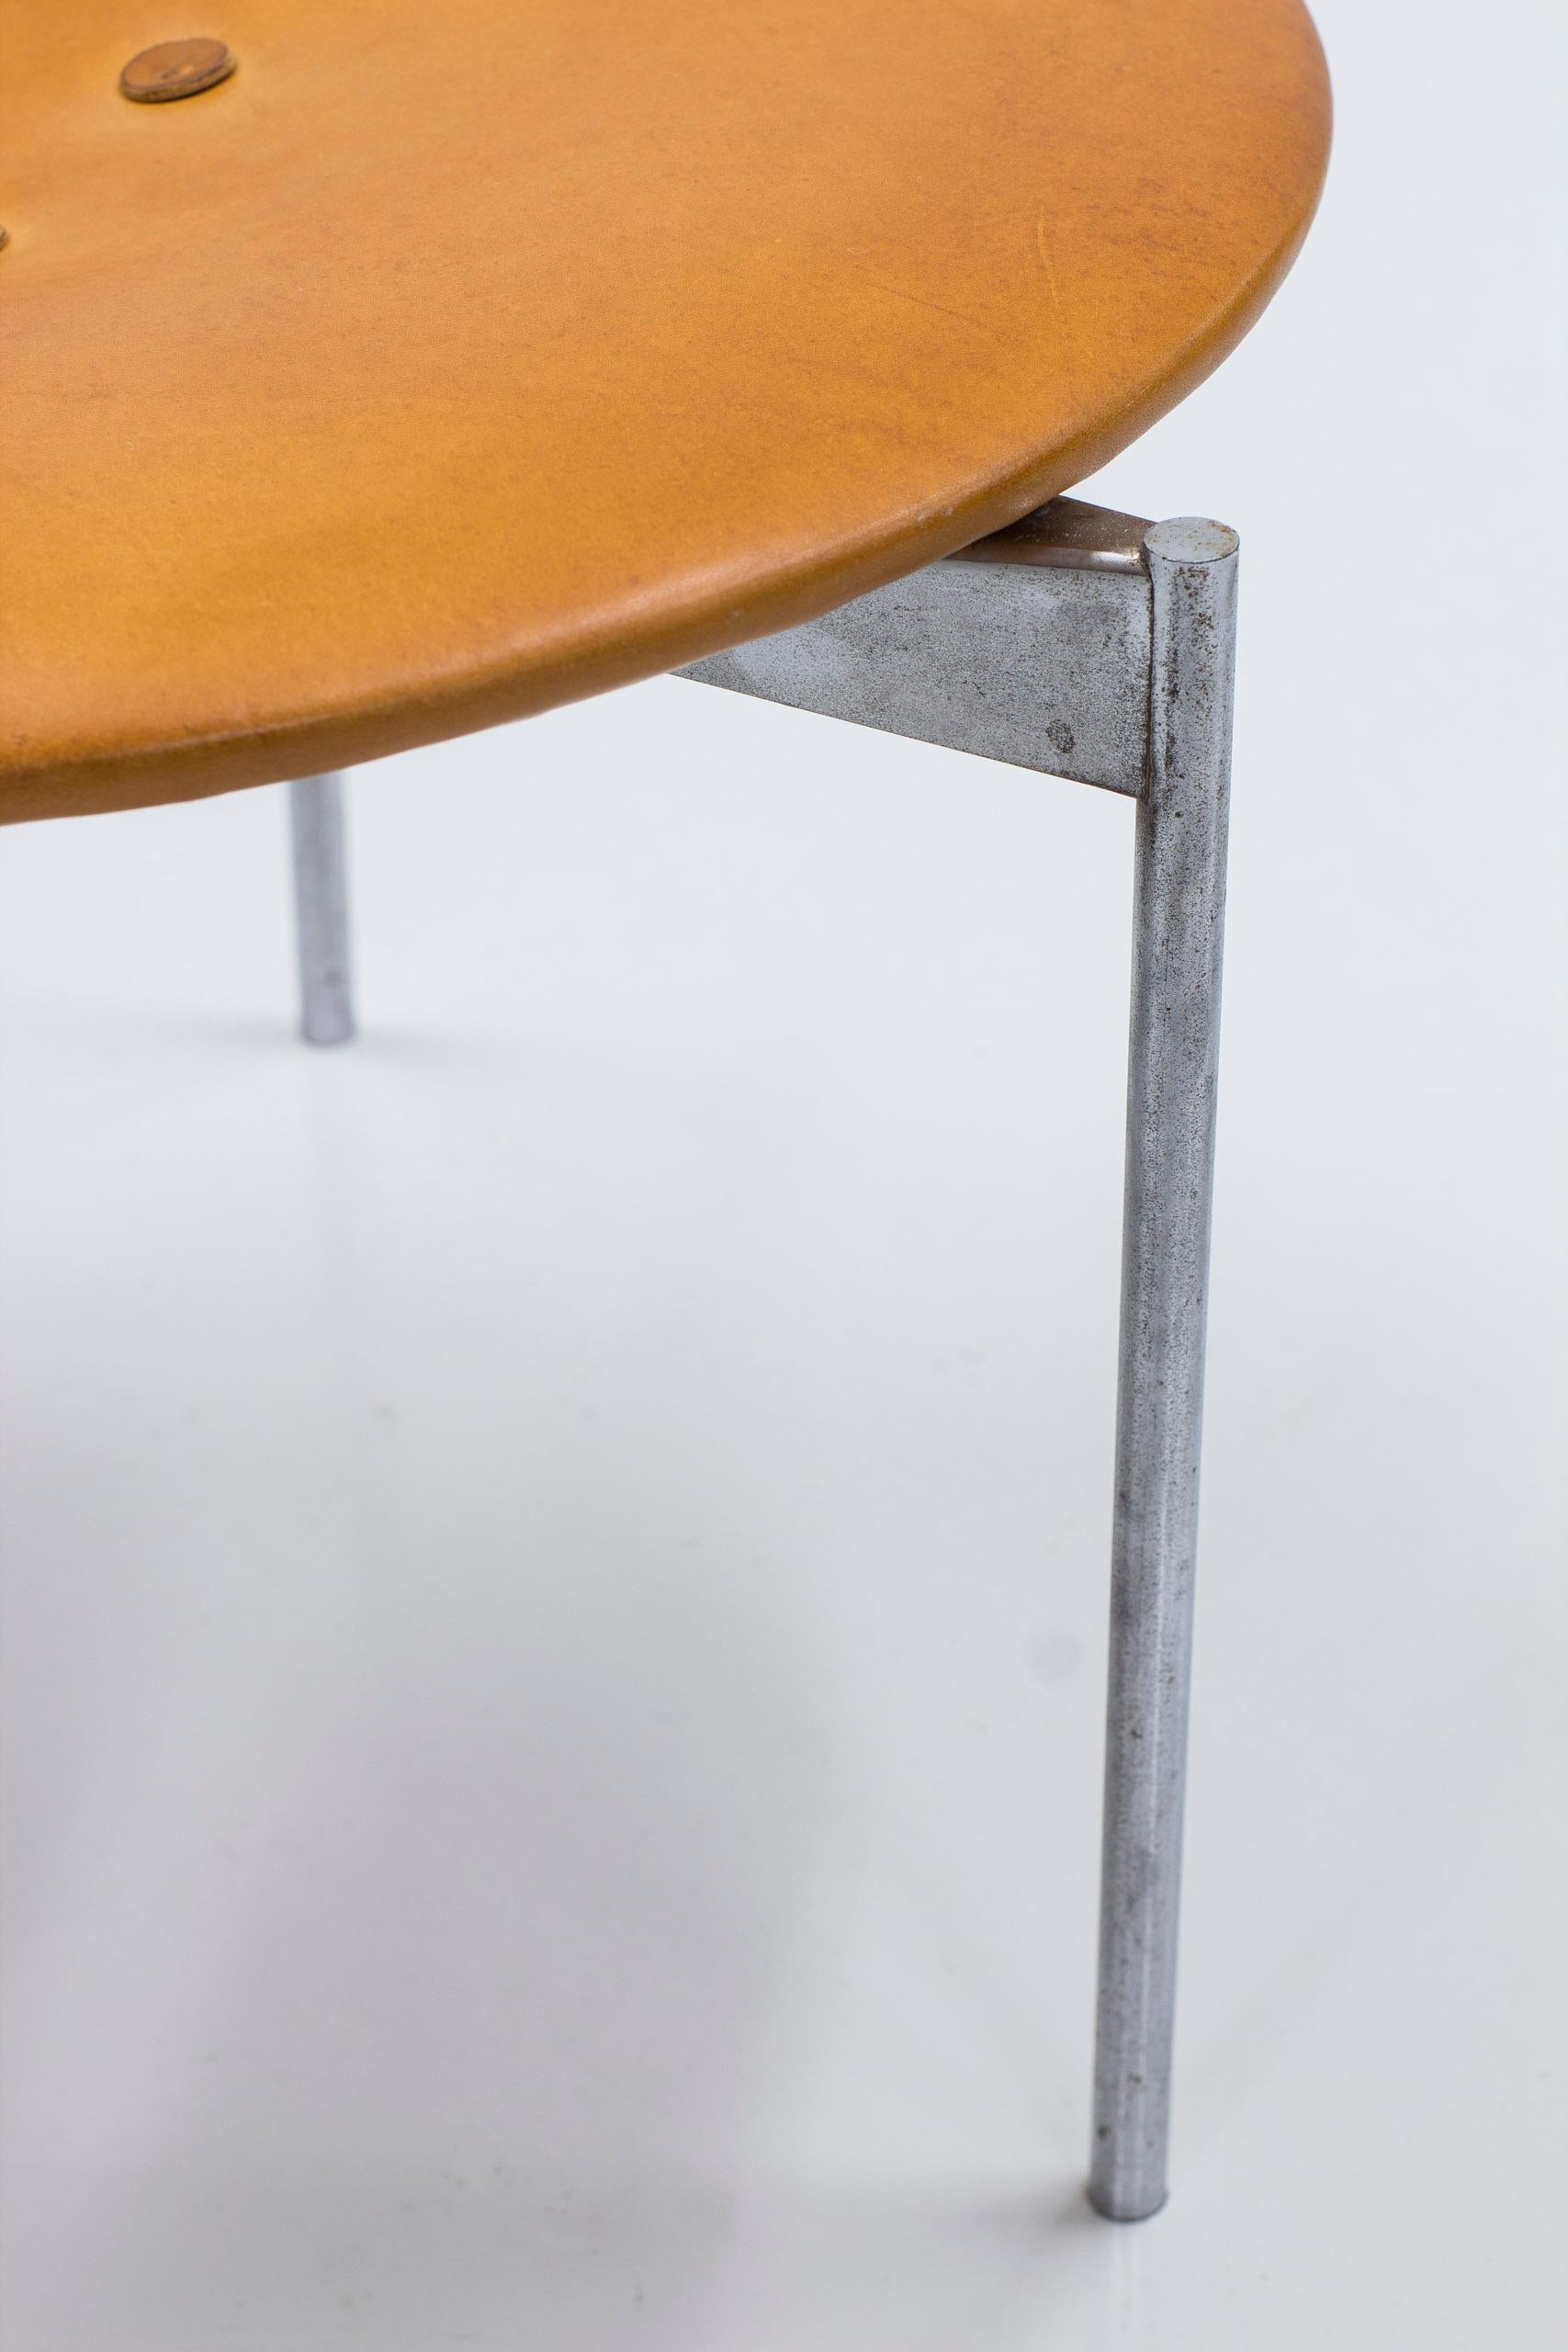 Mid-20th Century Patinated leather and Steel Stools by Uno & Östen Kristiansson, Sweden, 1960s For Sale